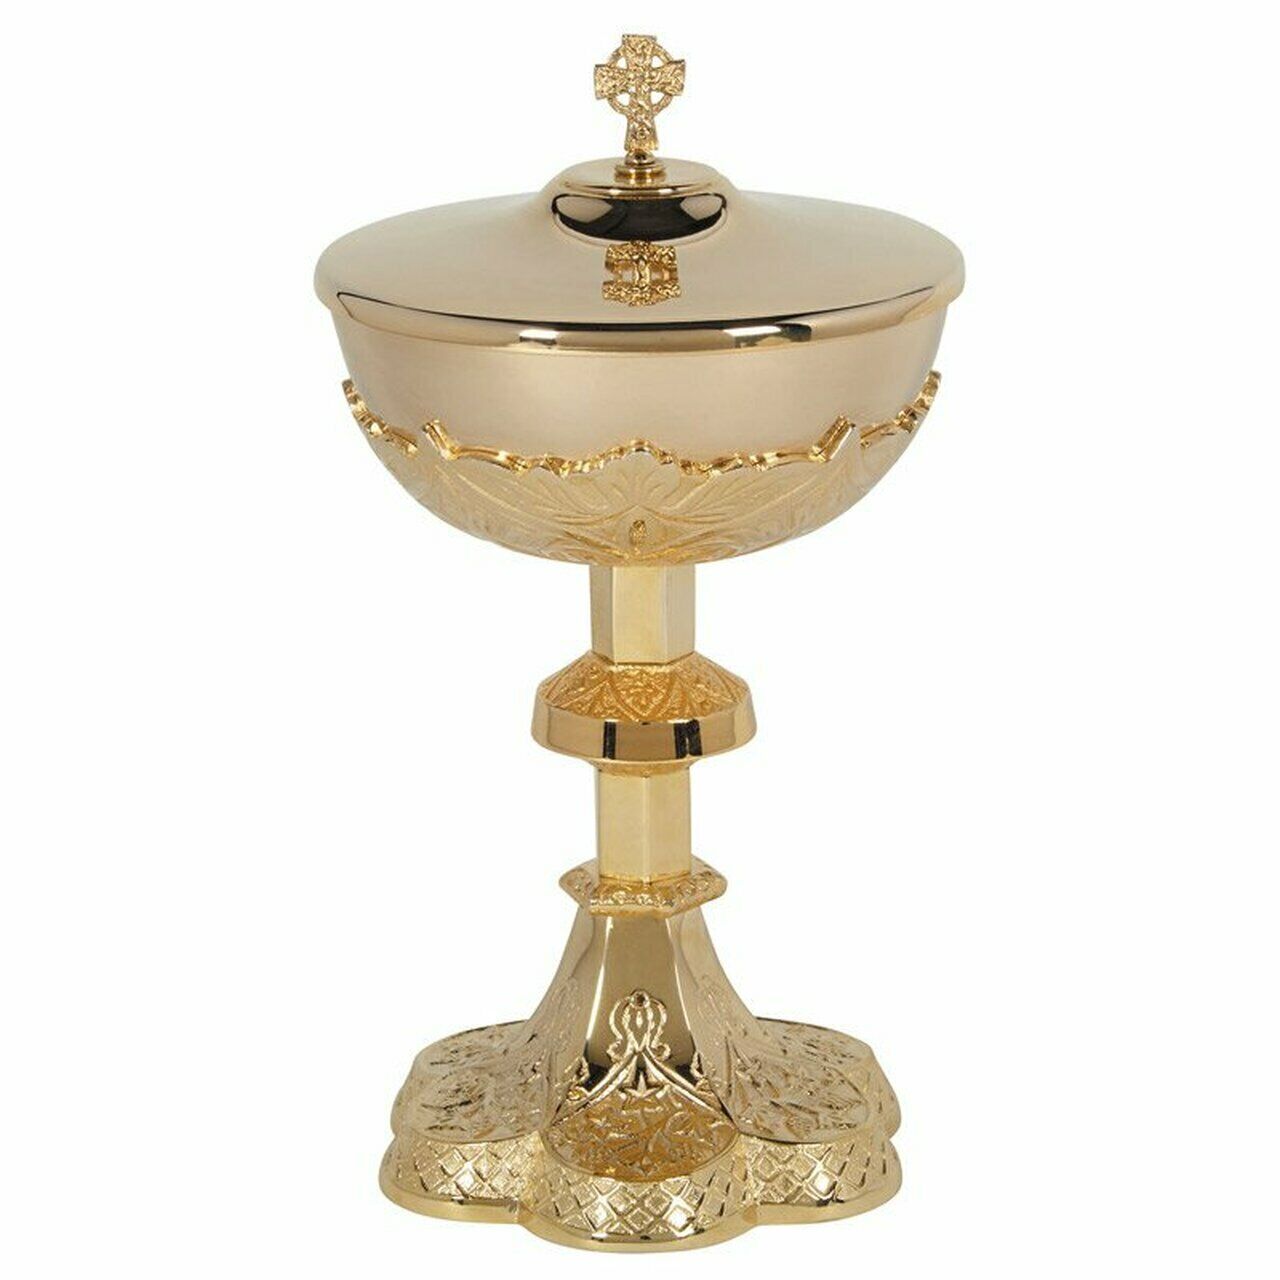 Embossed Vine Patterned Gold Plate Ornate Ciborium With Cross Cover Set, 11 In